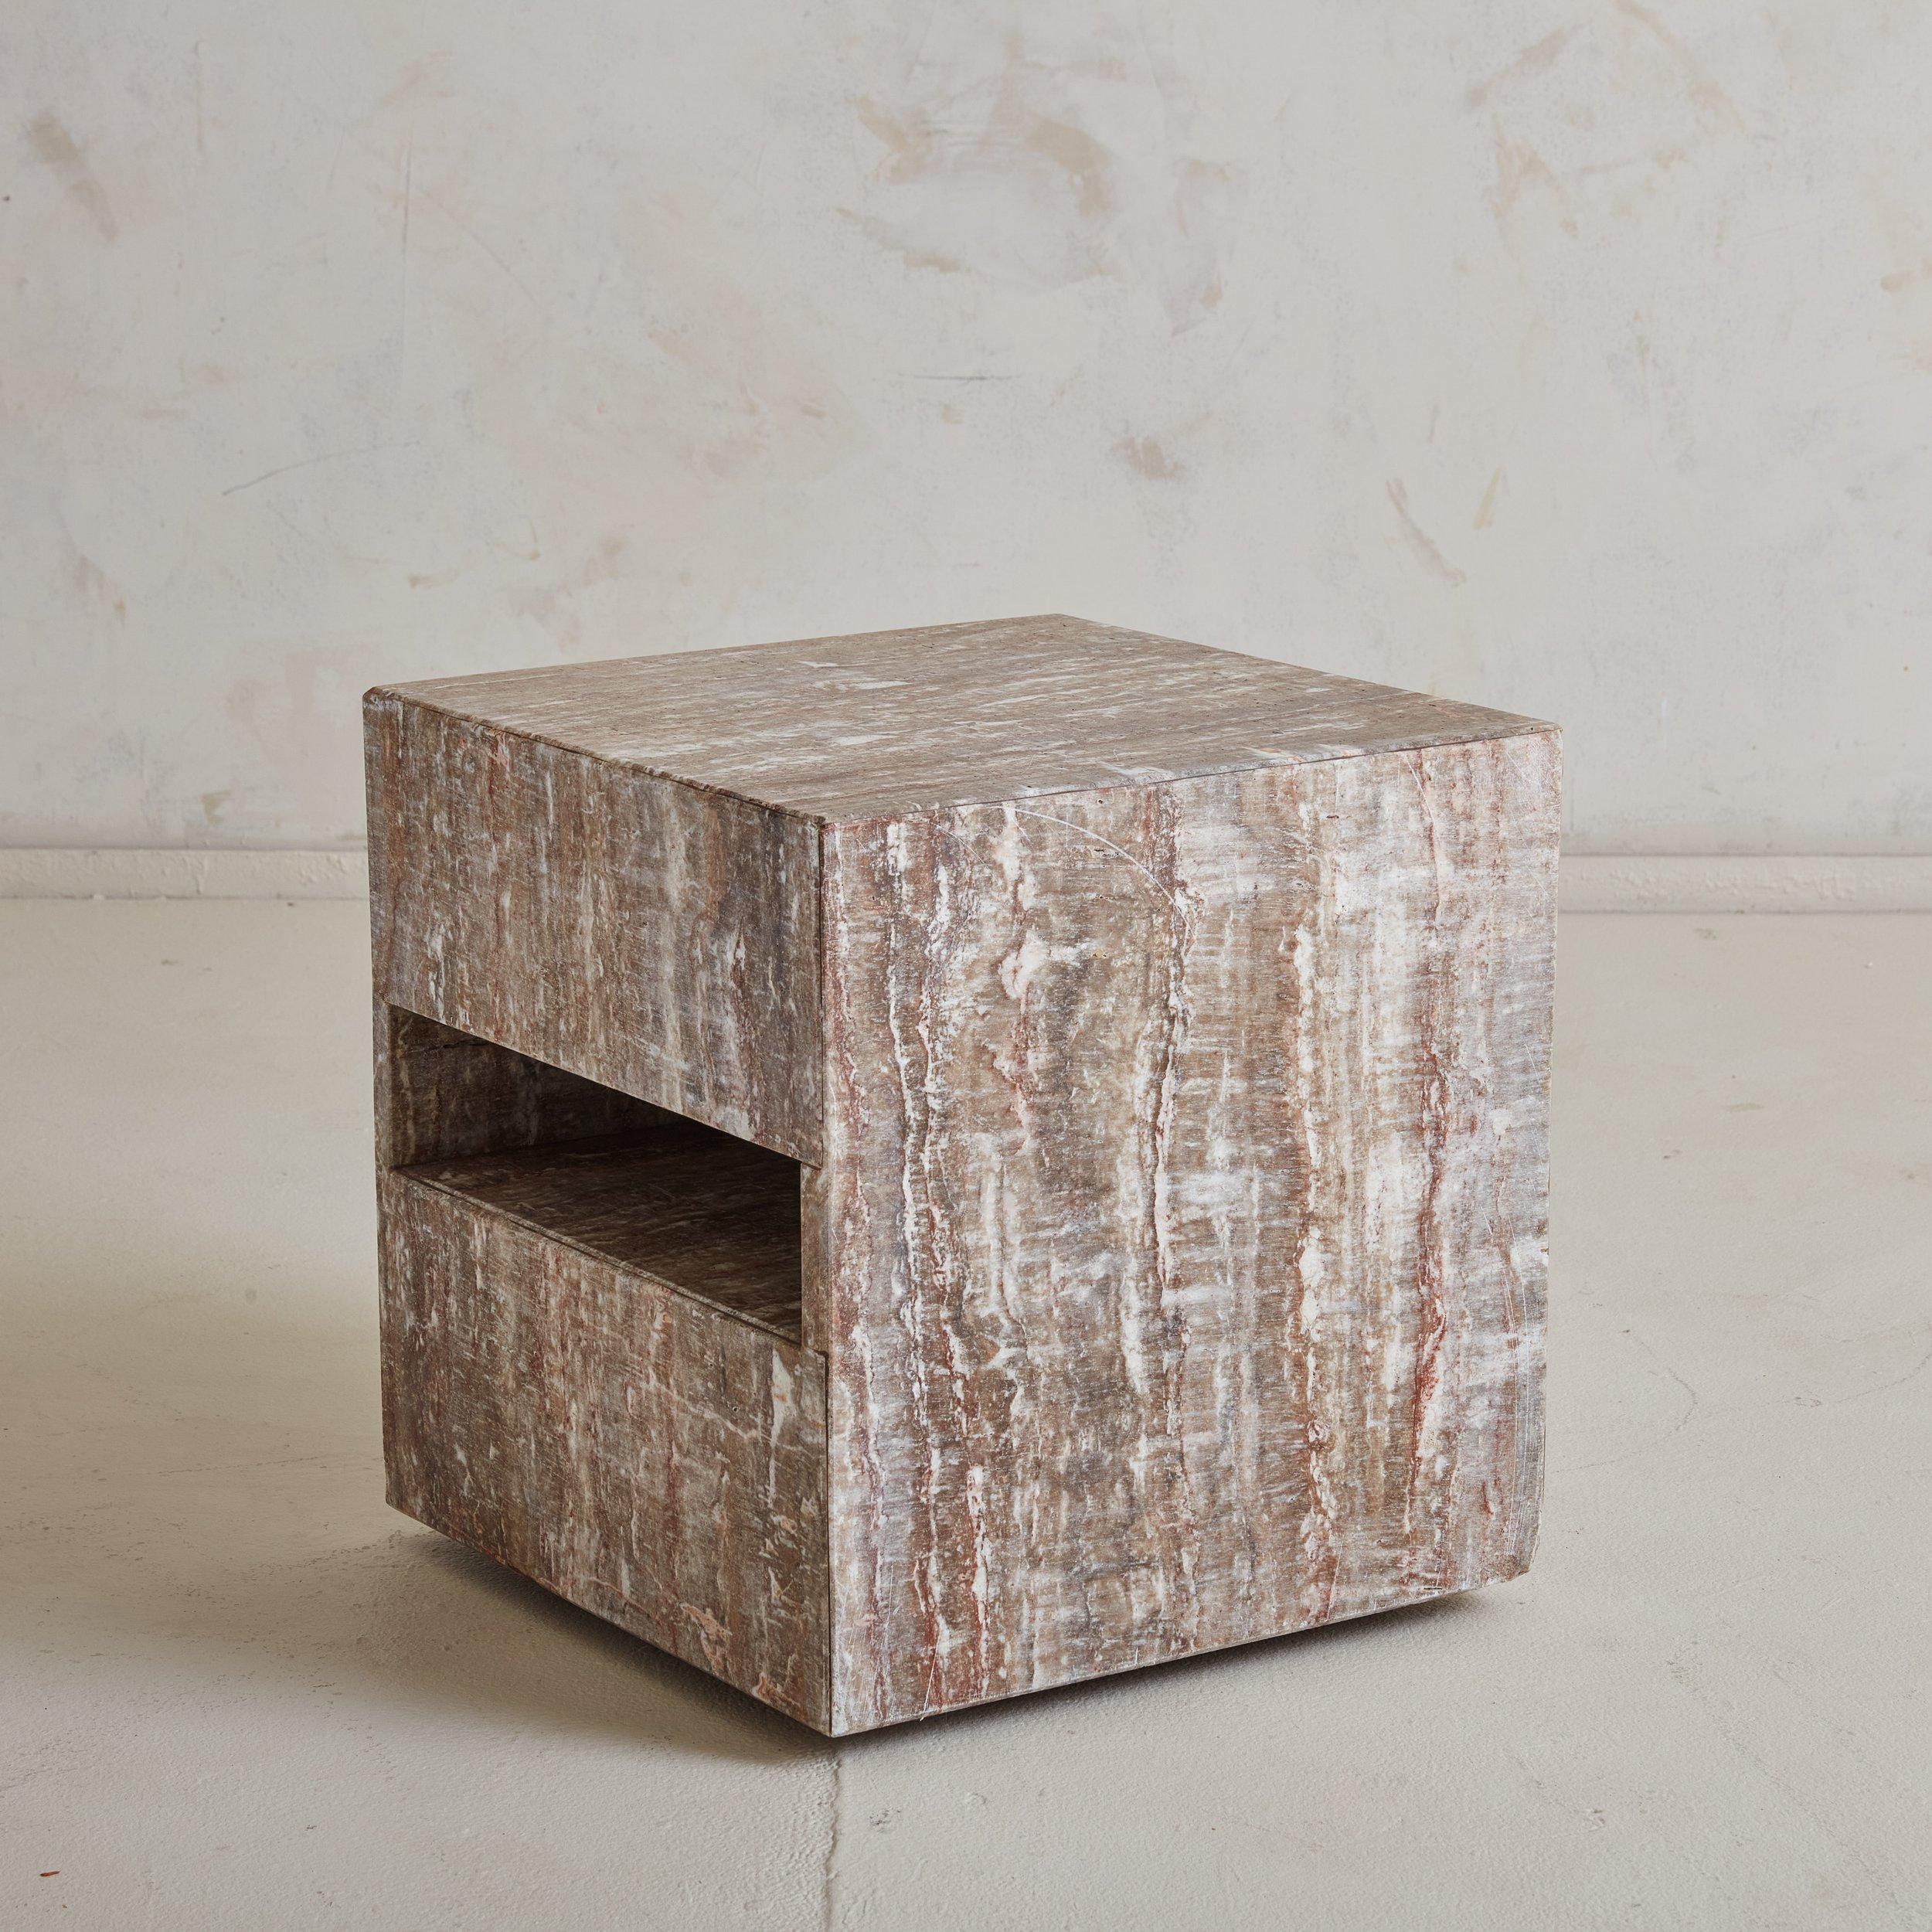 A 1970s beautifully veined grey marble side table with wheels. This Modern cubic side table features three rectangular cutouts perfect for displaying design books. The marble varies in hue, incorporating shades of grey, terracotta, and creamy white.